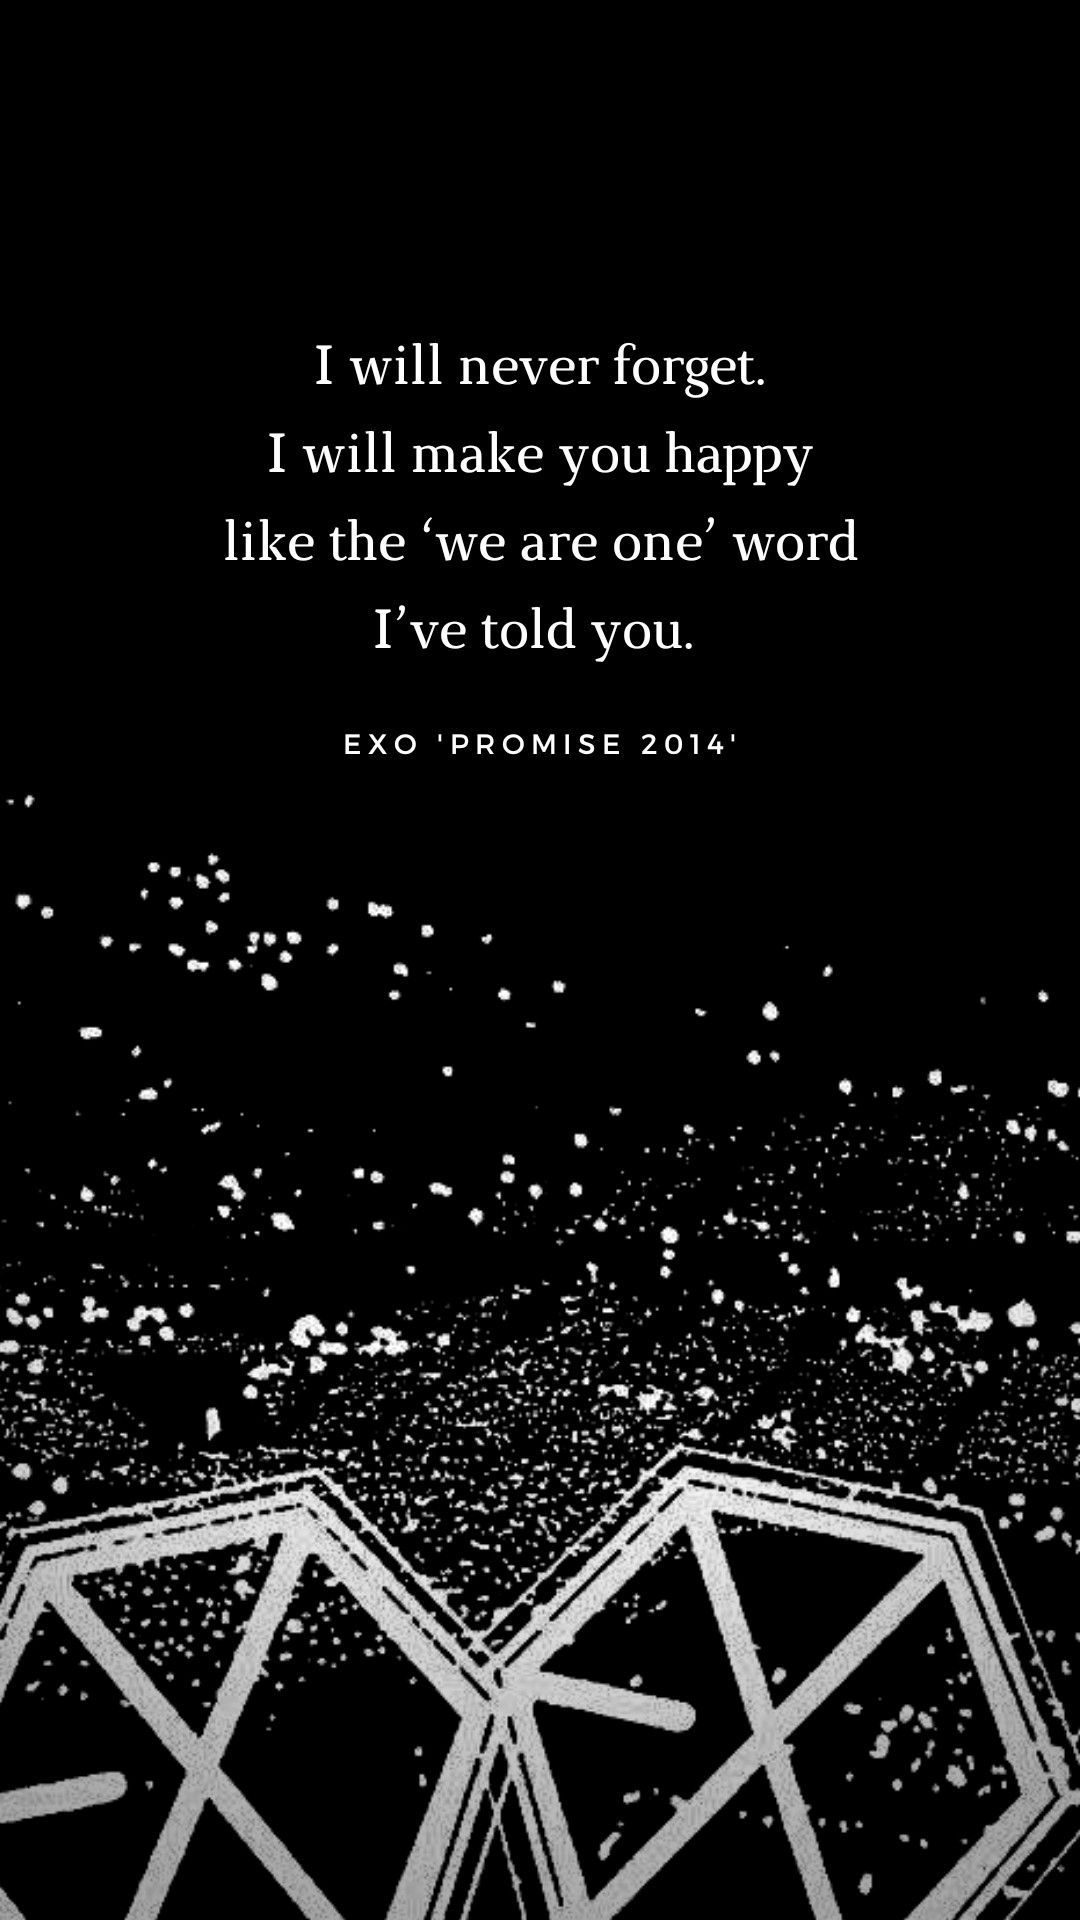 EXO Quotes Wallpaper Free EXO Quotes Background